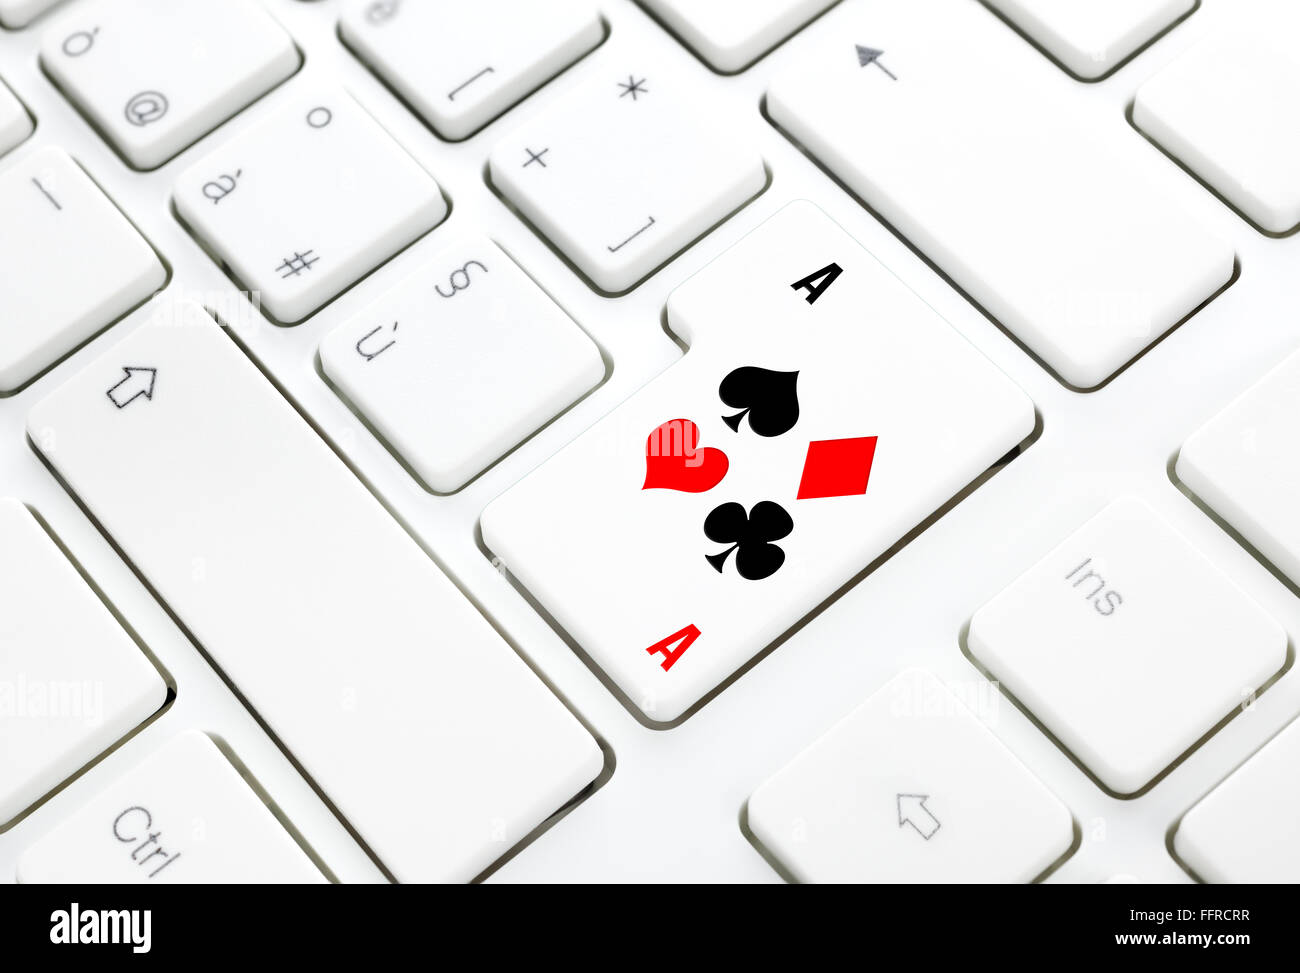 Poker or Casino online game concept. Spades hearts diamonds clubs key on white keyboard Stock Photo